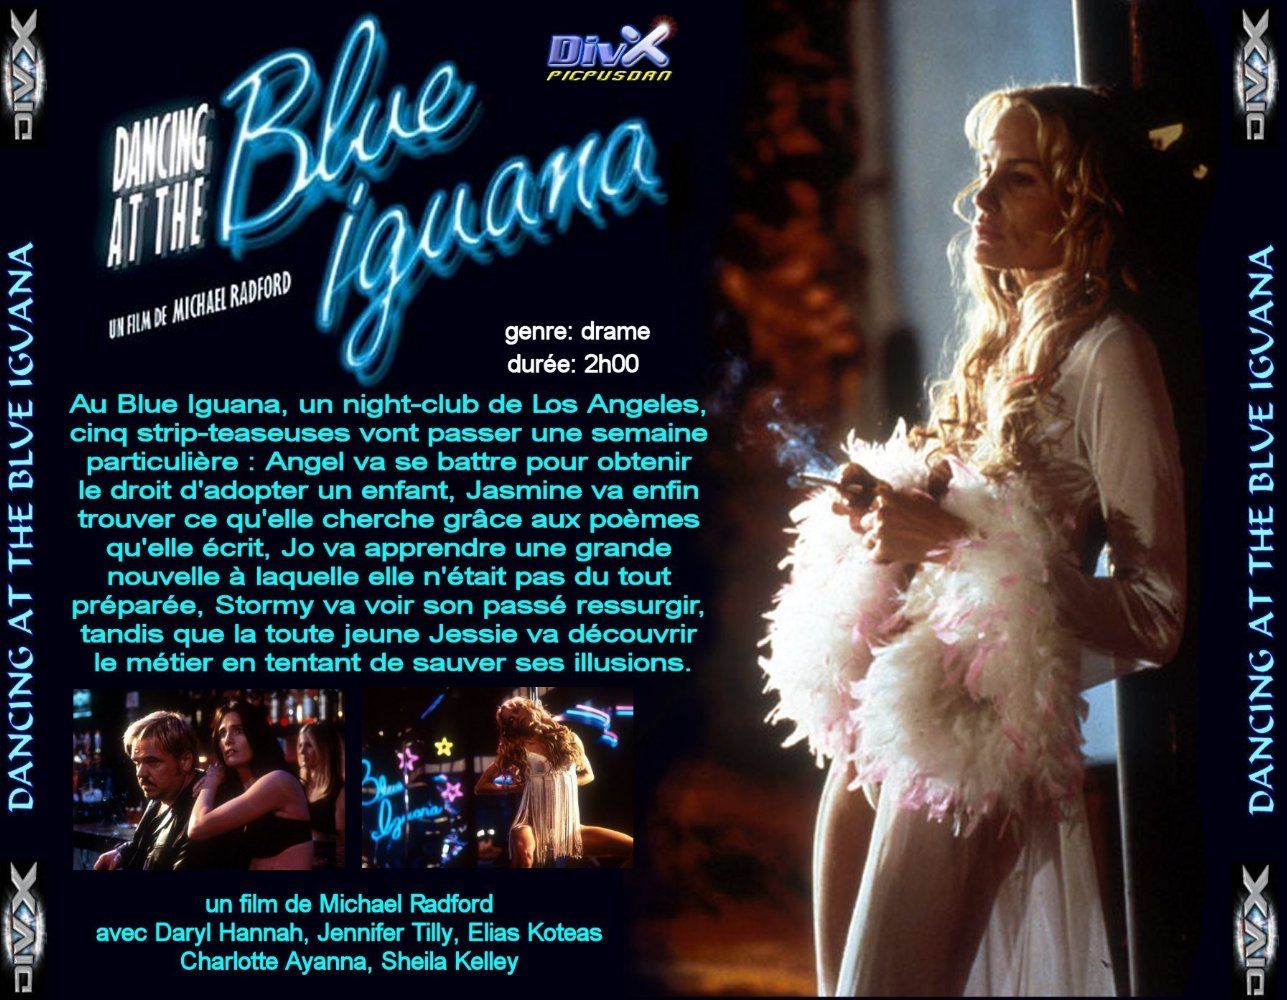 Watch Dancing At The Blue Iguana Online For Free In Hd Quality On